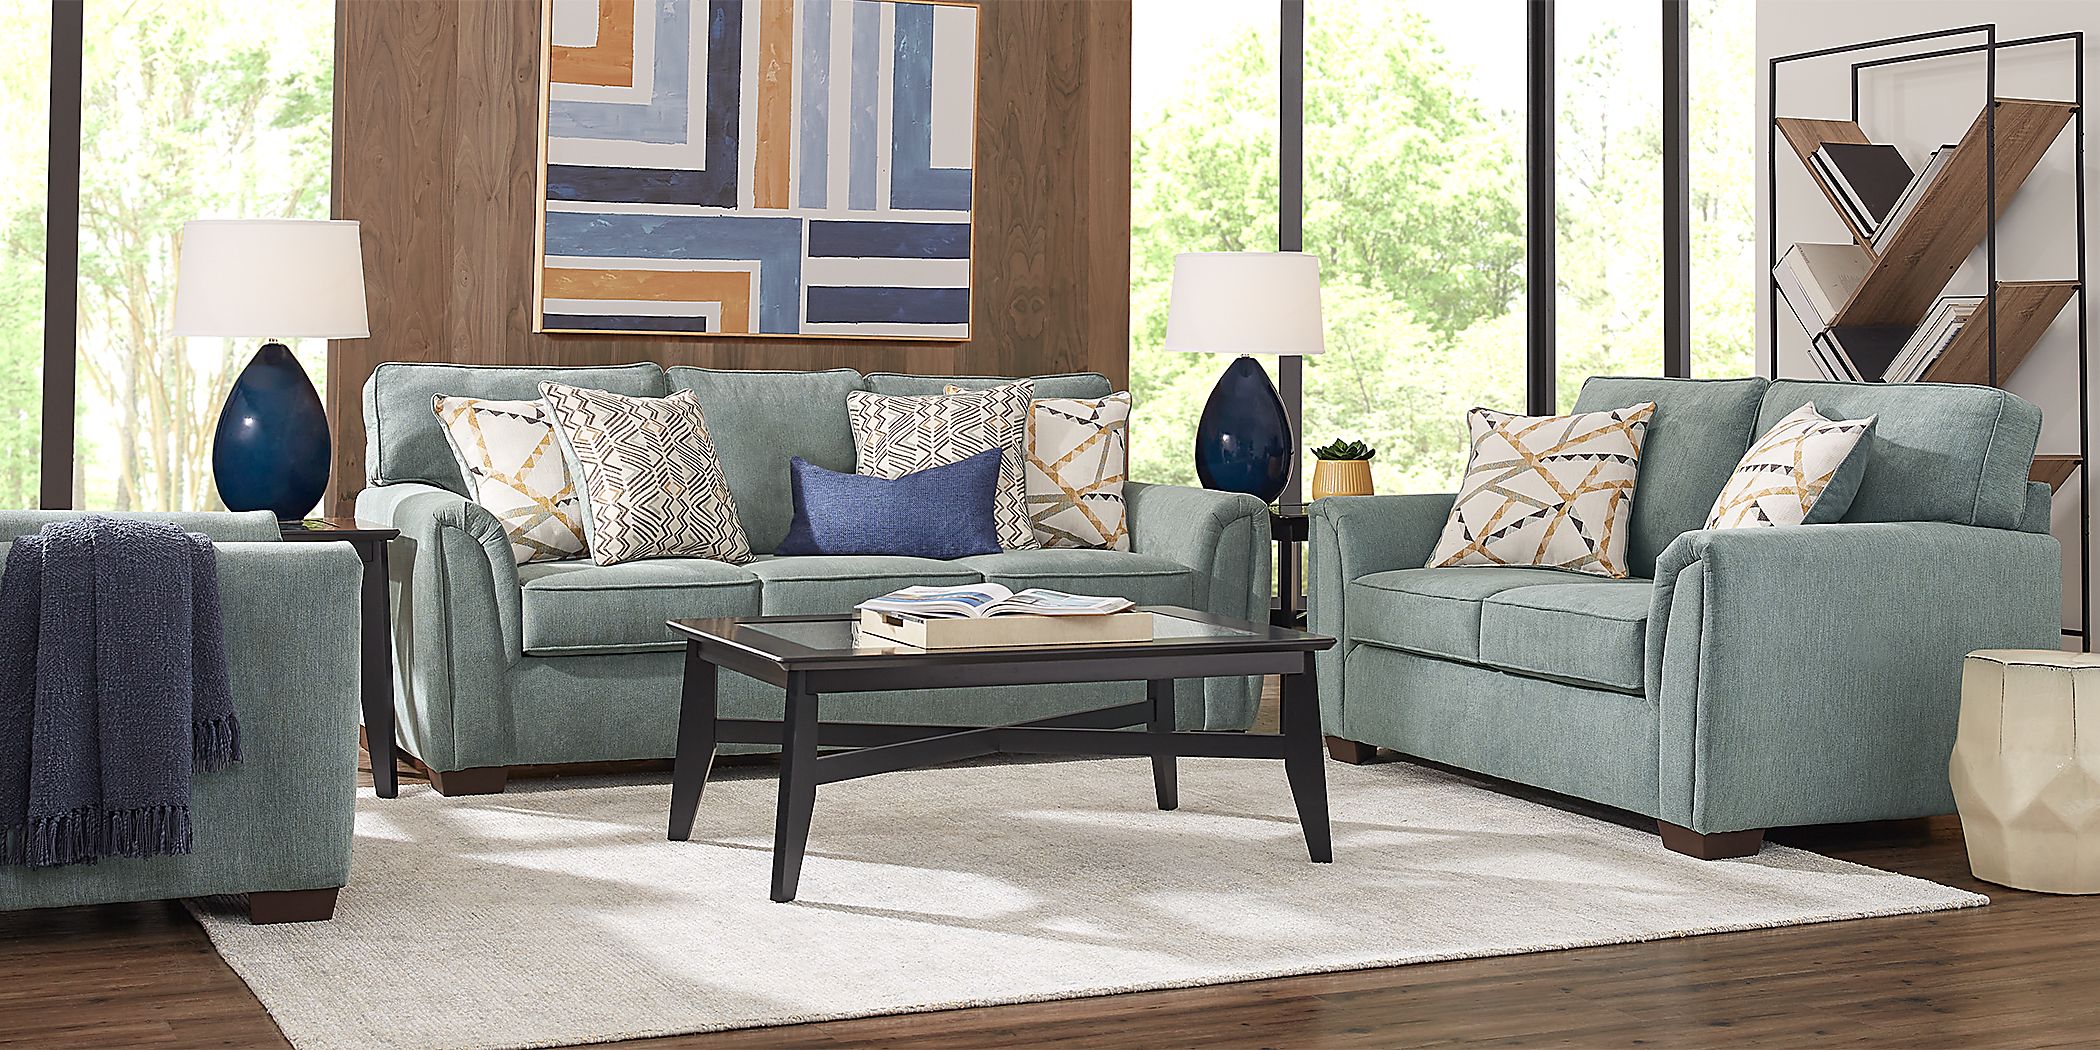 Rooms To Go Amalie Teal 8 Pc Living Room